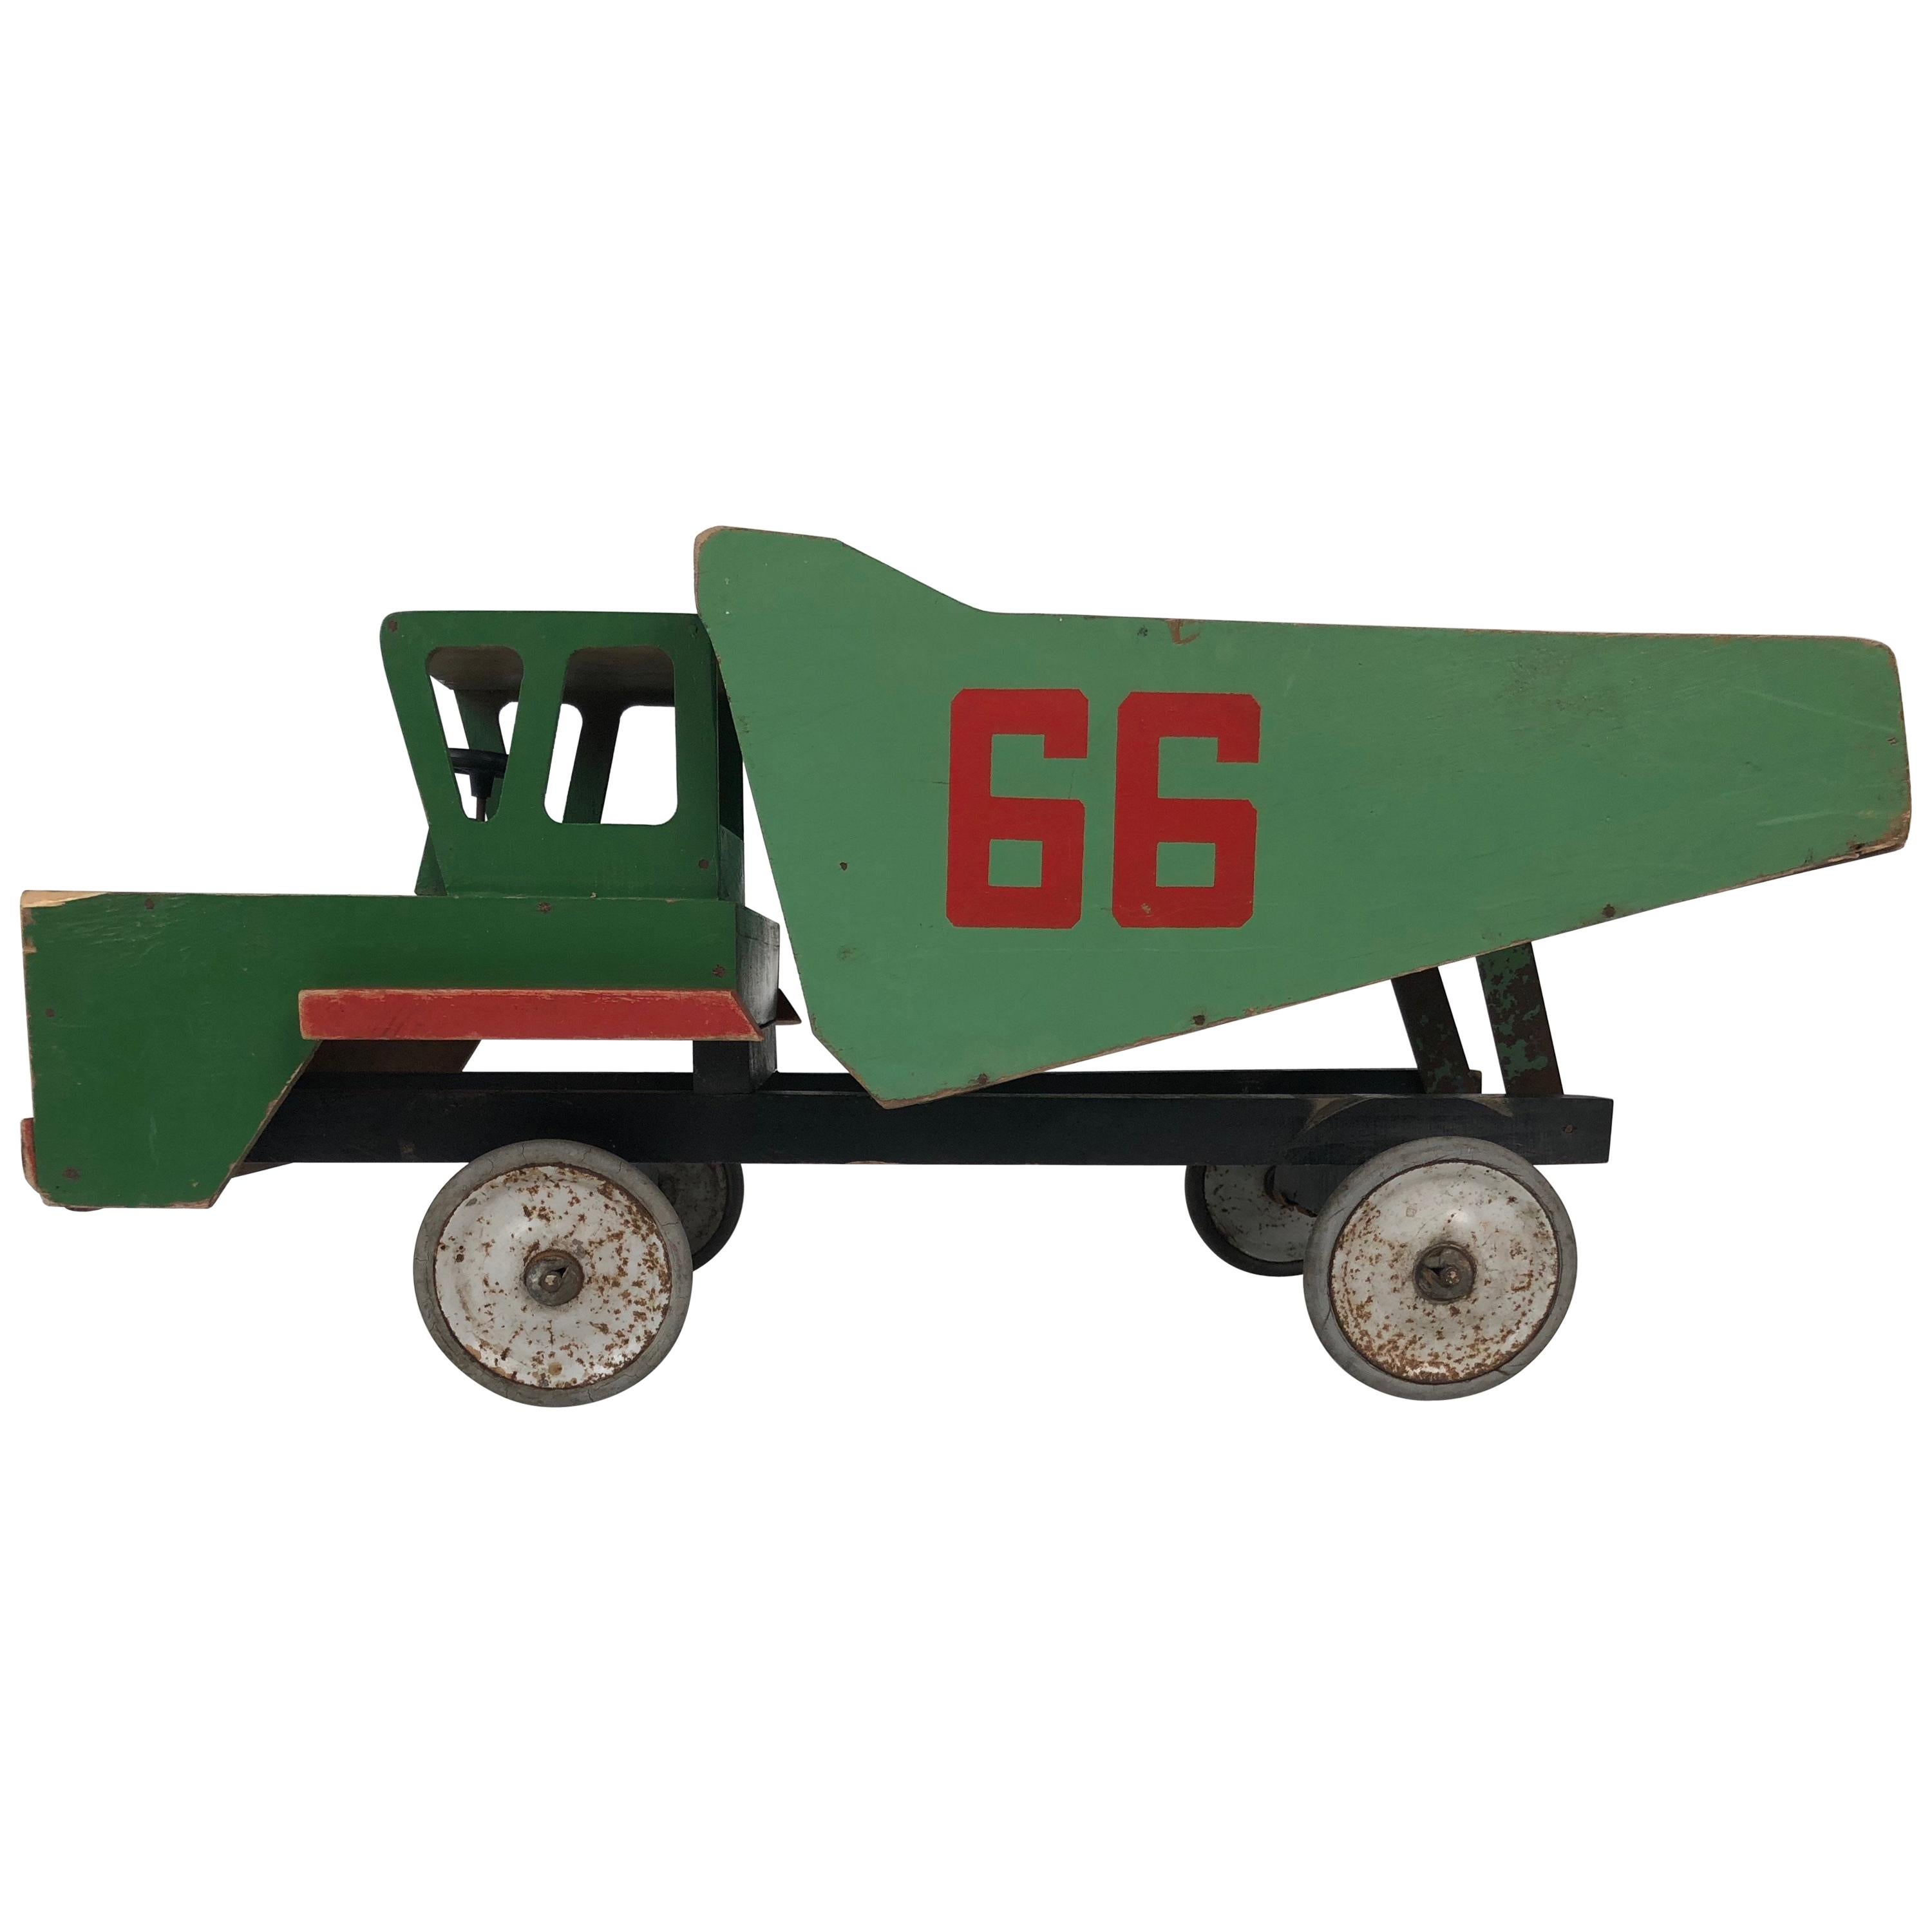 Russian Midcentury Toy Truck from Wood